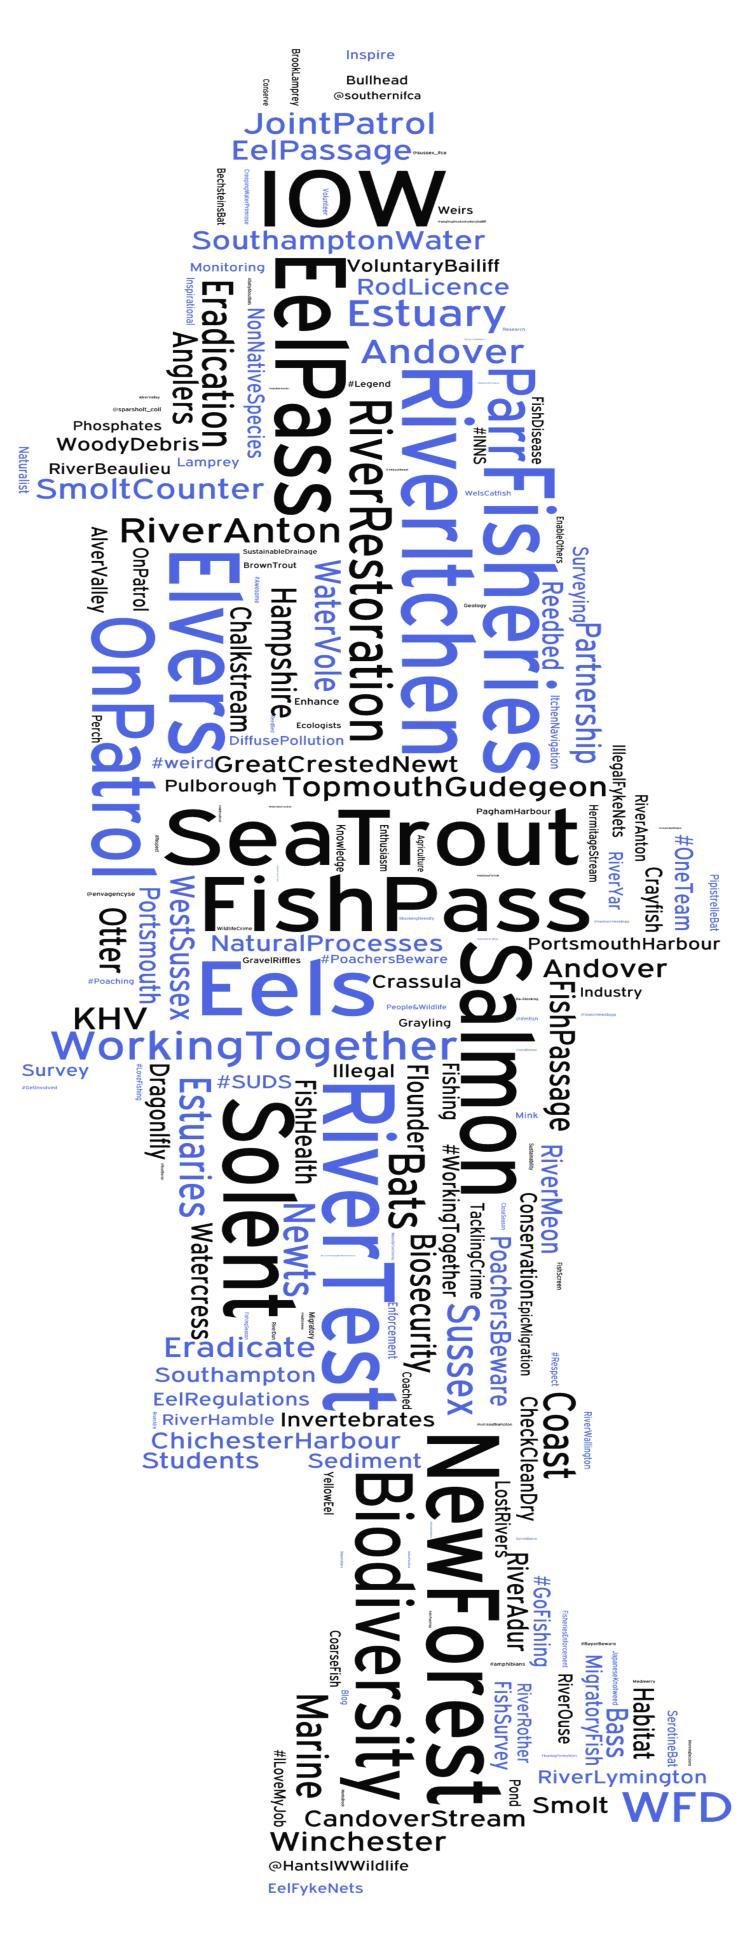 A word cloud showing frequently used words in our tweets during 2014. Thank you to all our Followers for your support and interactions.